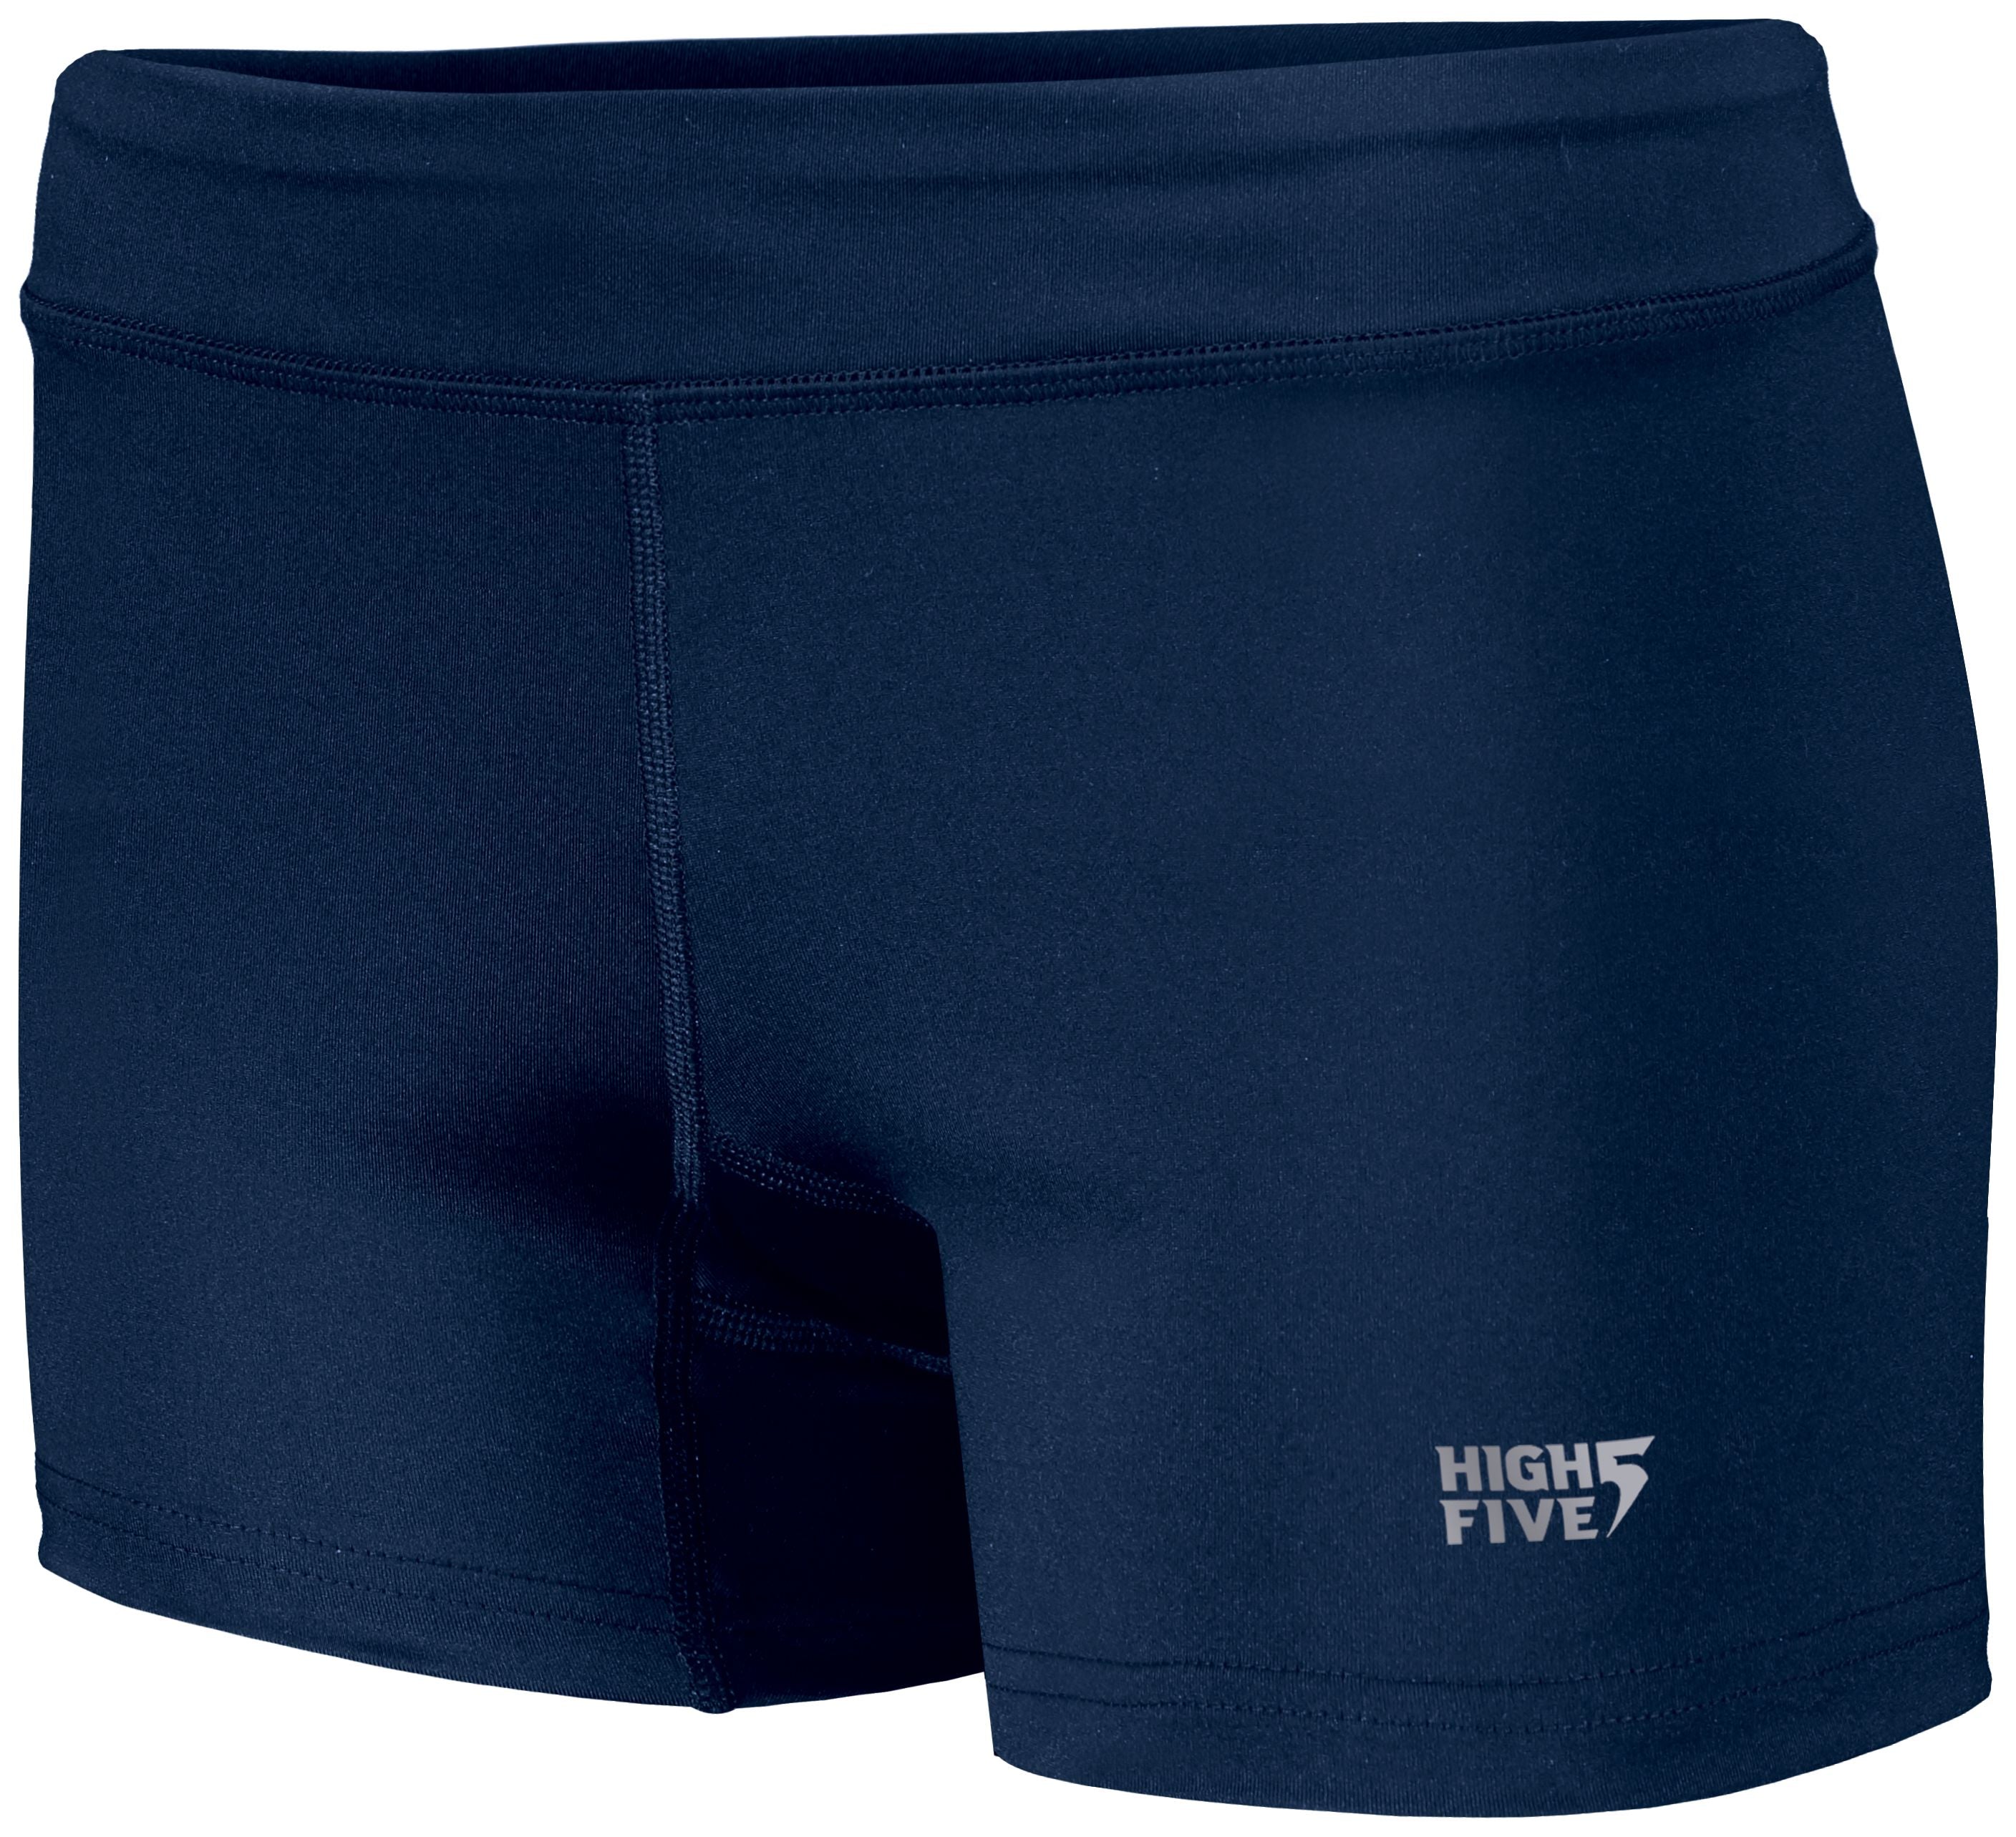 High 5 Ladies Truhit Volleyball Shorts in Navy  -Part of the Ladies, Ladies-Shorts, High5-Products, Volleyball product lines at KanaleyCreations.com